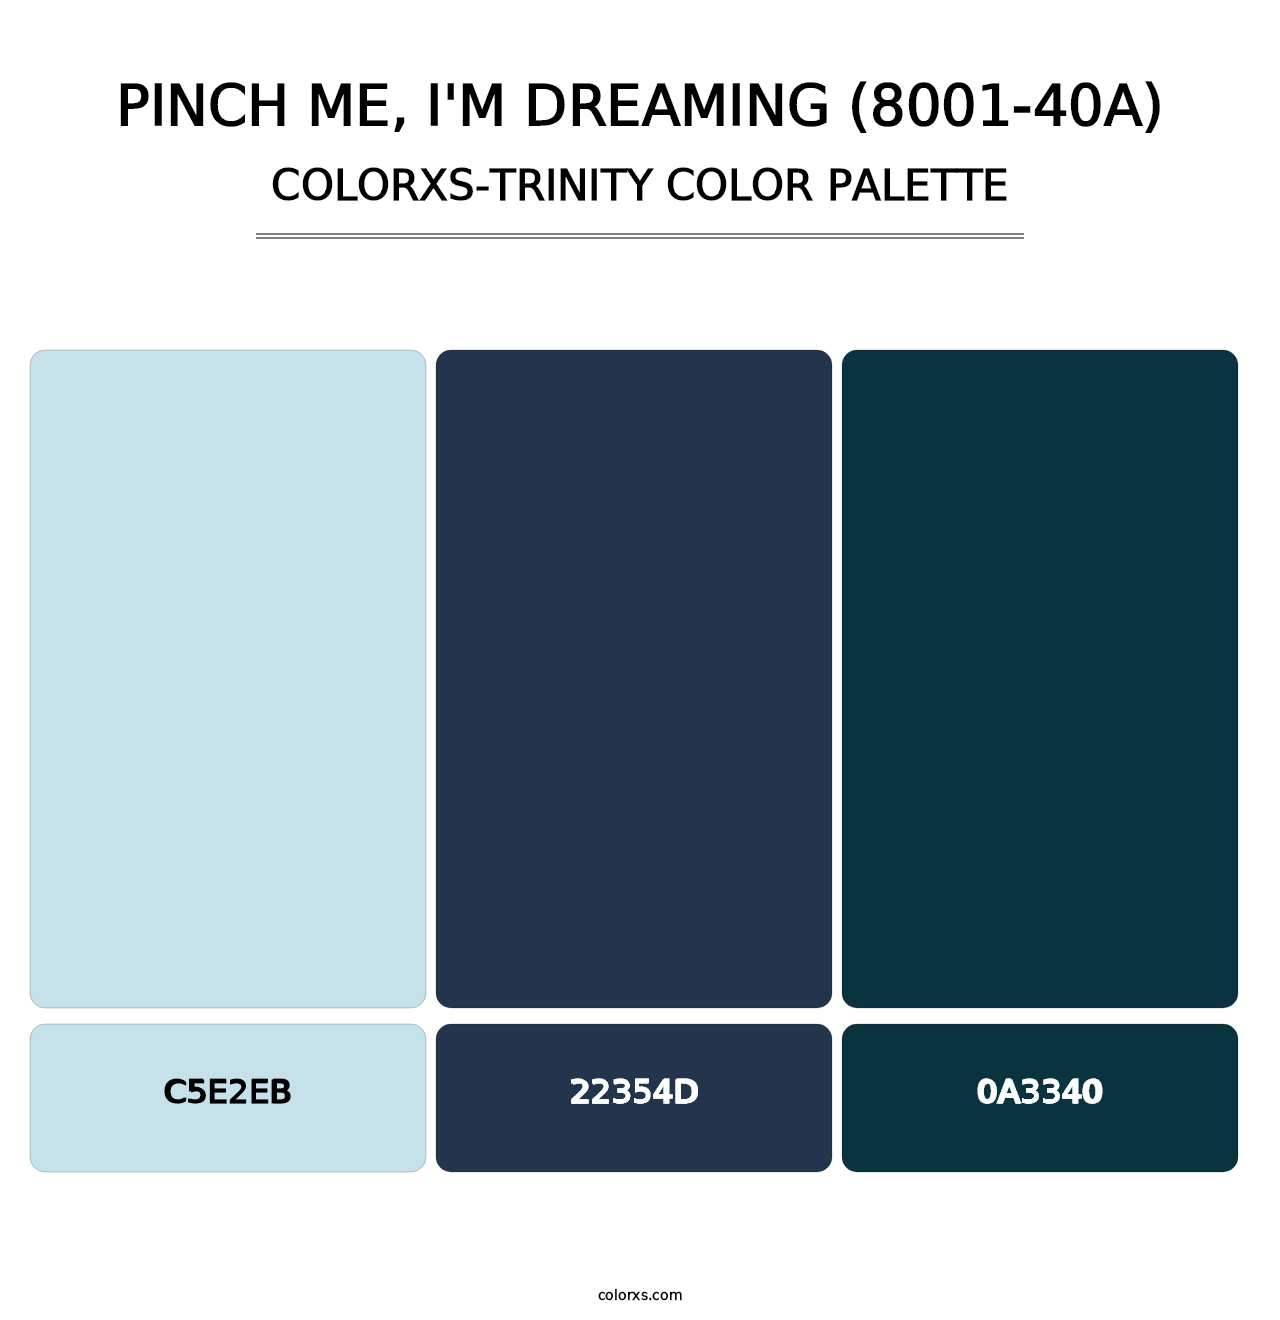 Pinch Me, I'm Dreaming (8001-40A) - Colorxs Trinity Palette